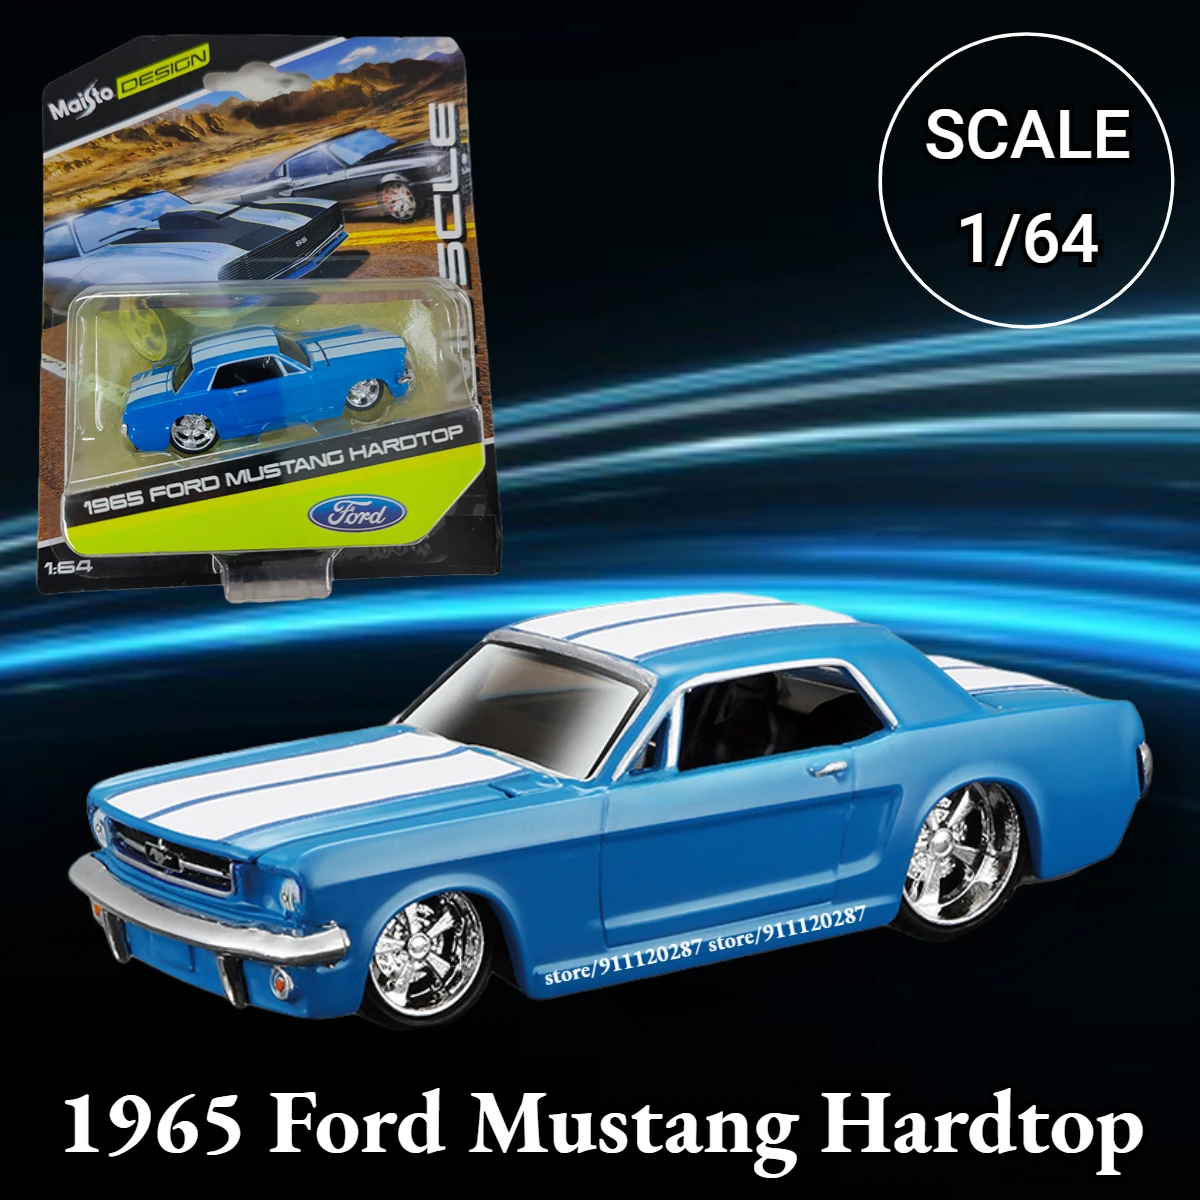 

Maisto 1:64 Miniature Vintage Car Model, 1965 Ford Mustang Hardtop Scale Replica Diecast Vehicle Collection Toy for Boy